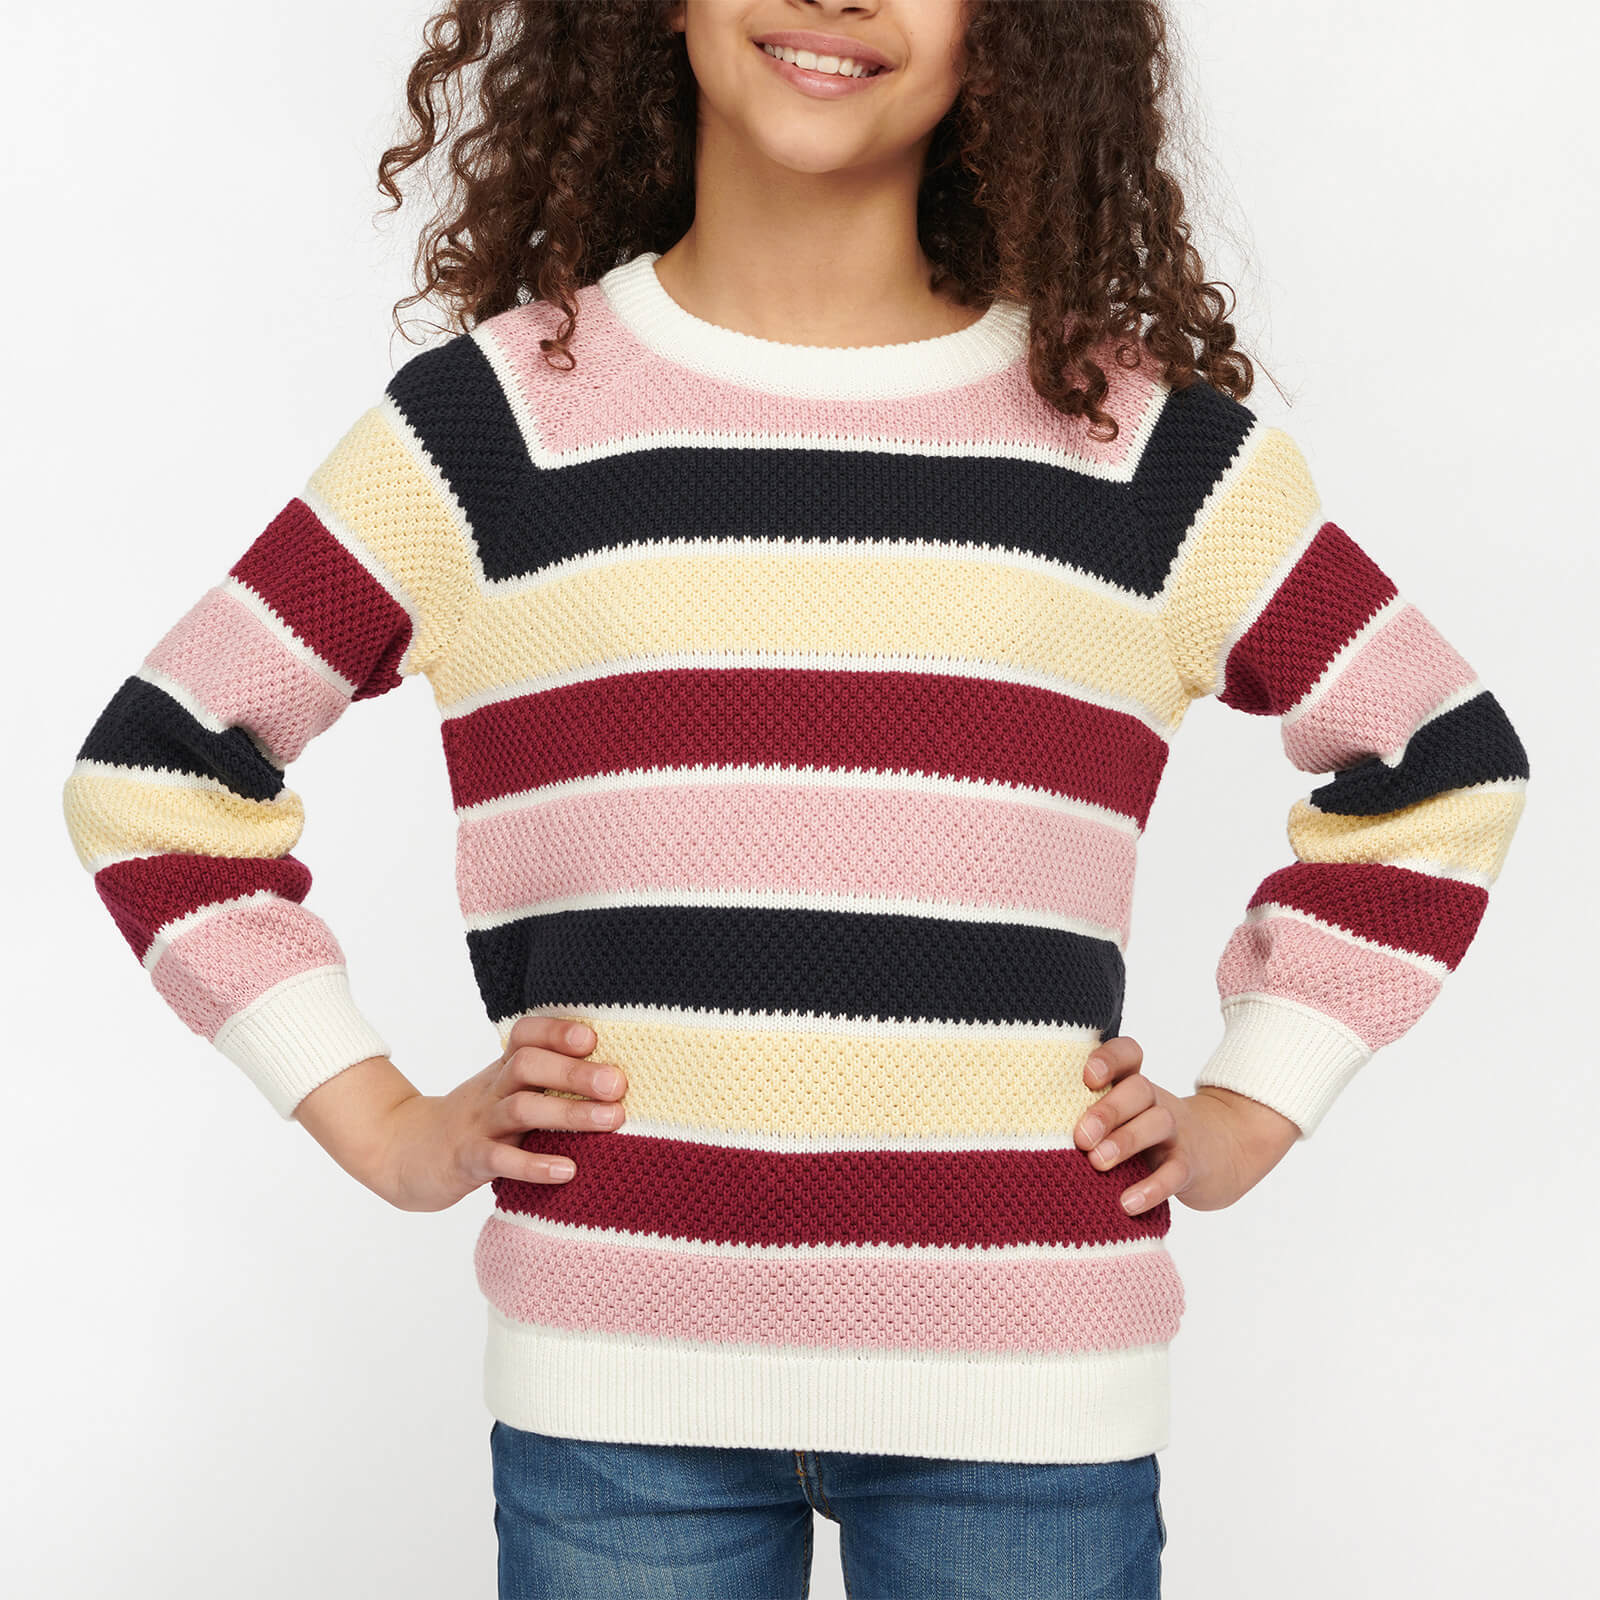 Barbour Girls' Collywell Knitted Jumper - Multi - S (6-7 Years)